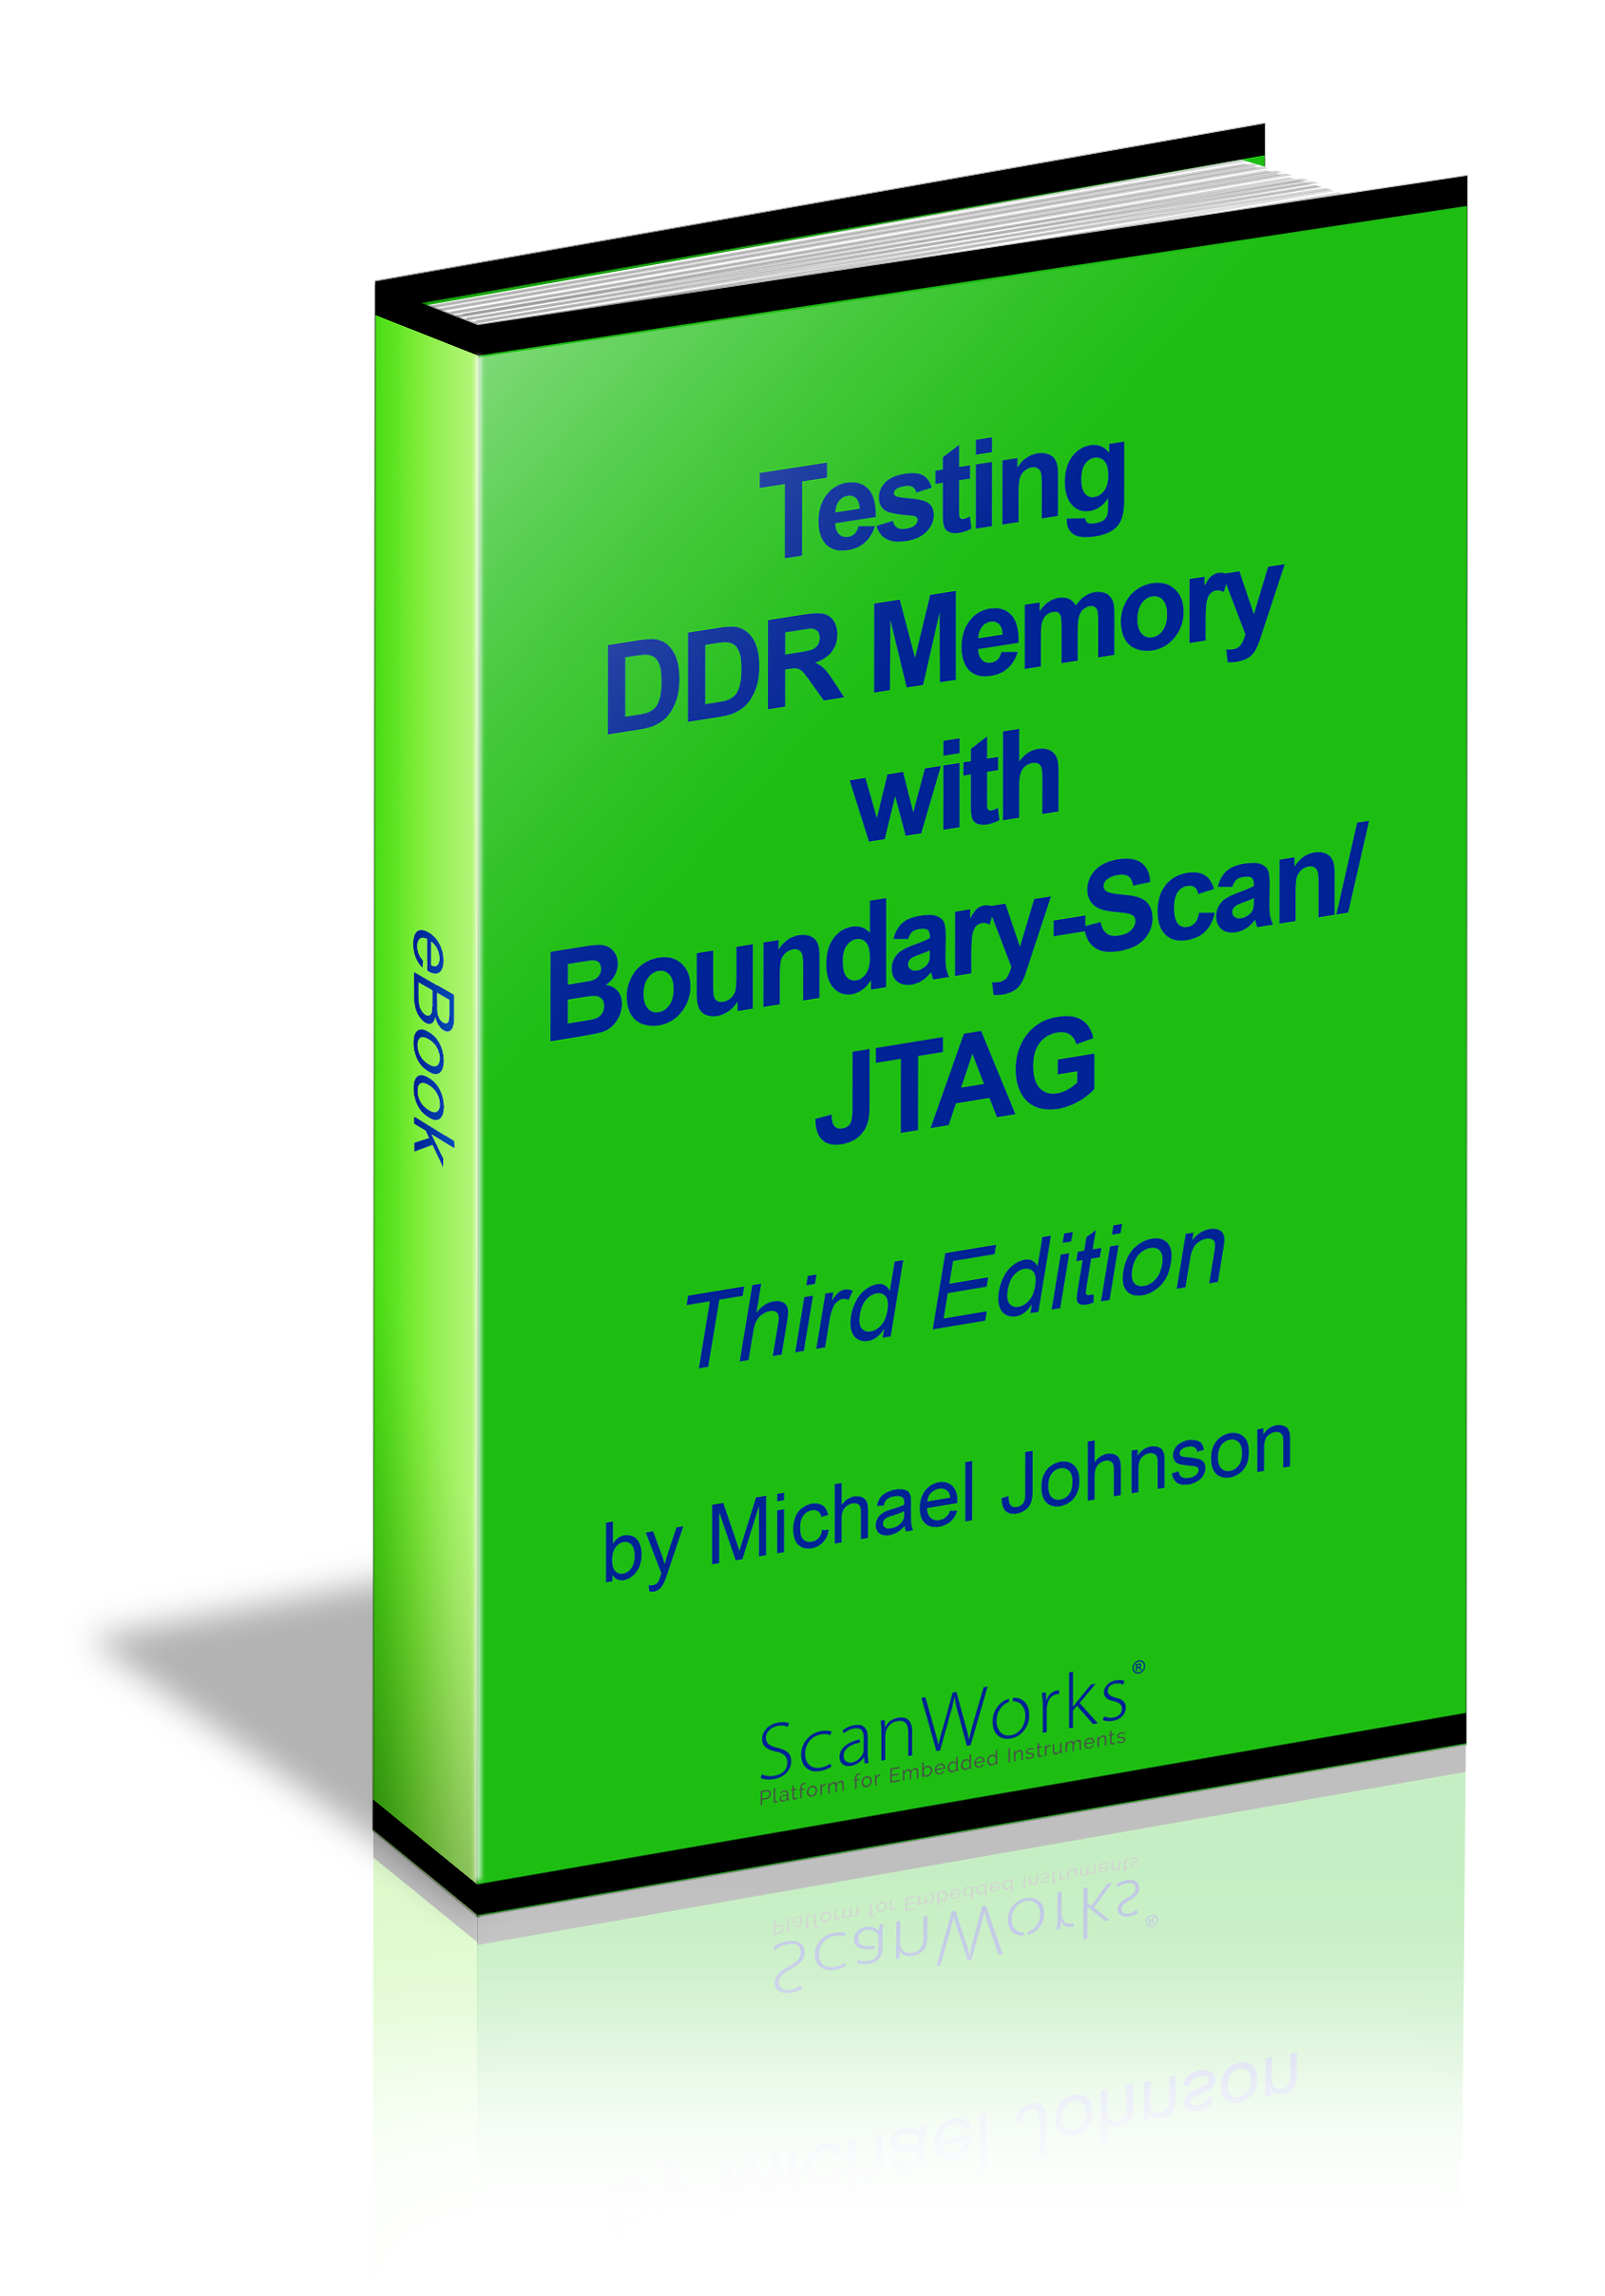 Testing DDR Memory with Boundary-Scan/JTAG | Third Edition | ASSET 